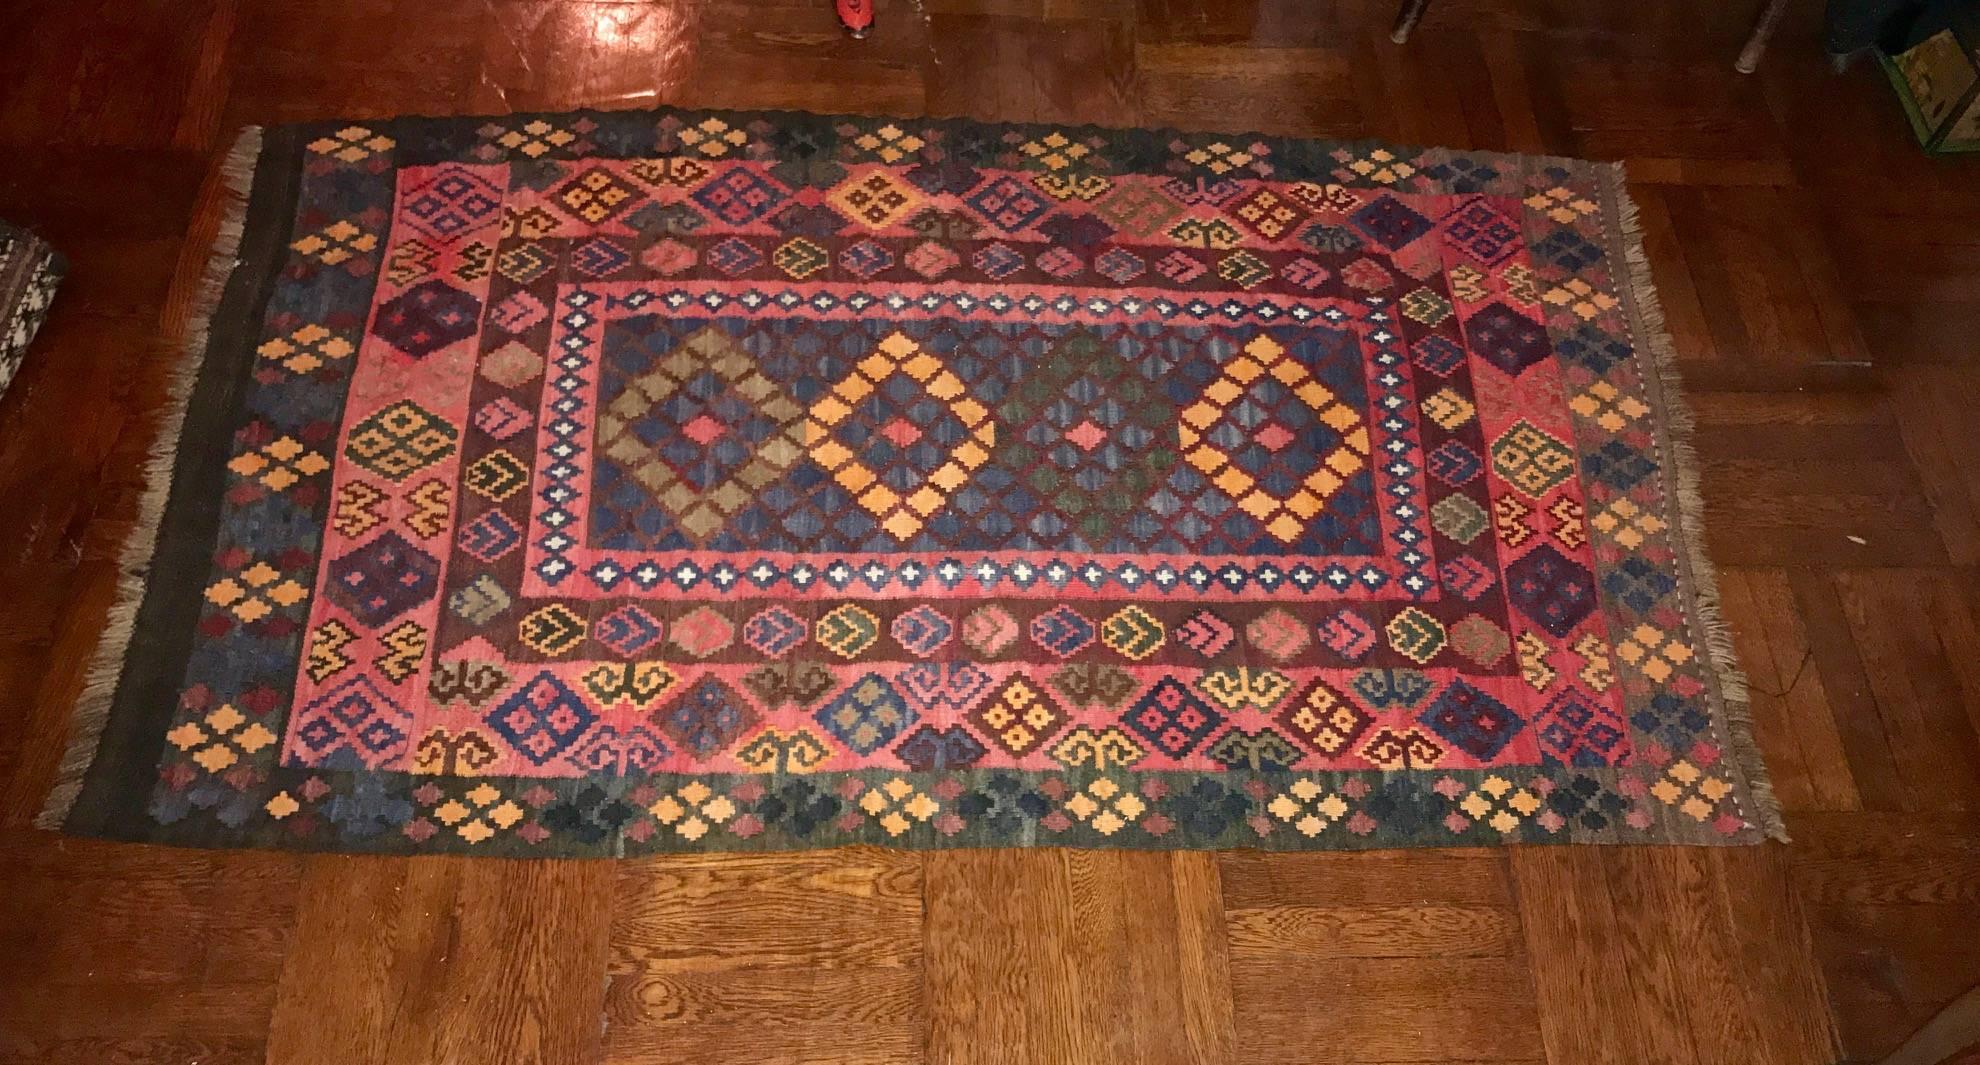 Late 20th Century Tribal Hand-Knotted Moroccan Area Rug, Modern Design Fabulous Quality and Color